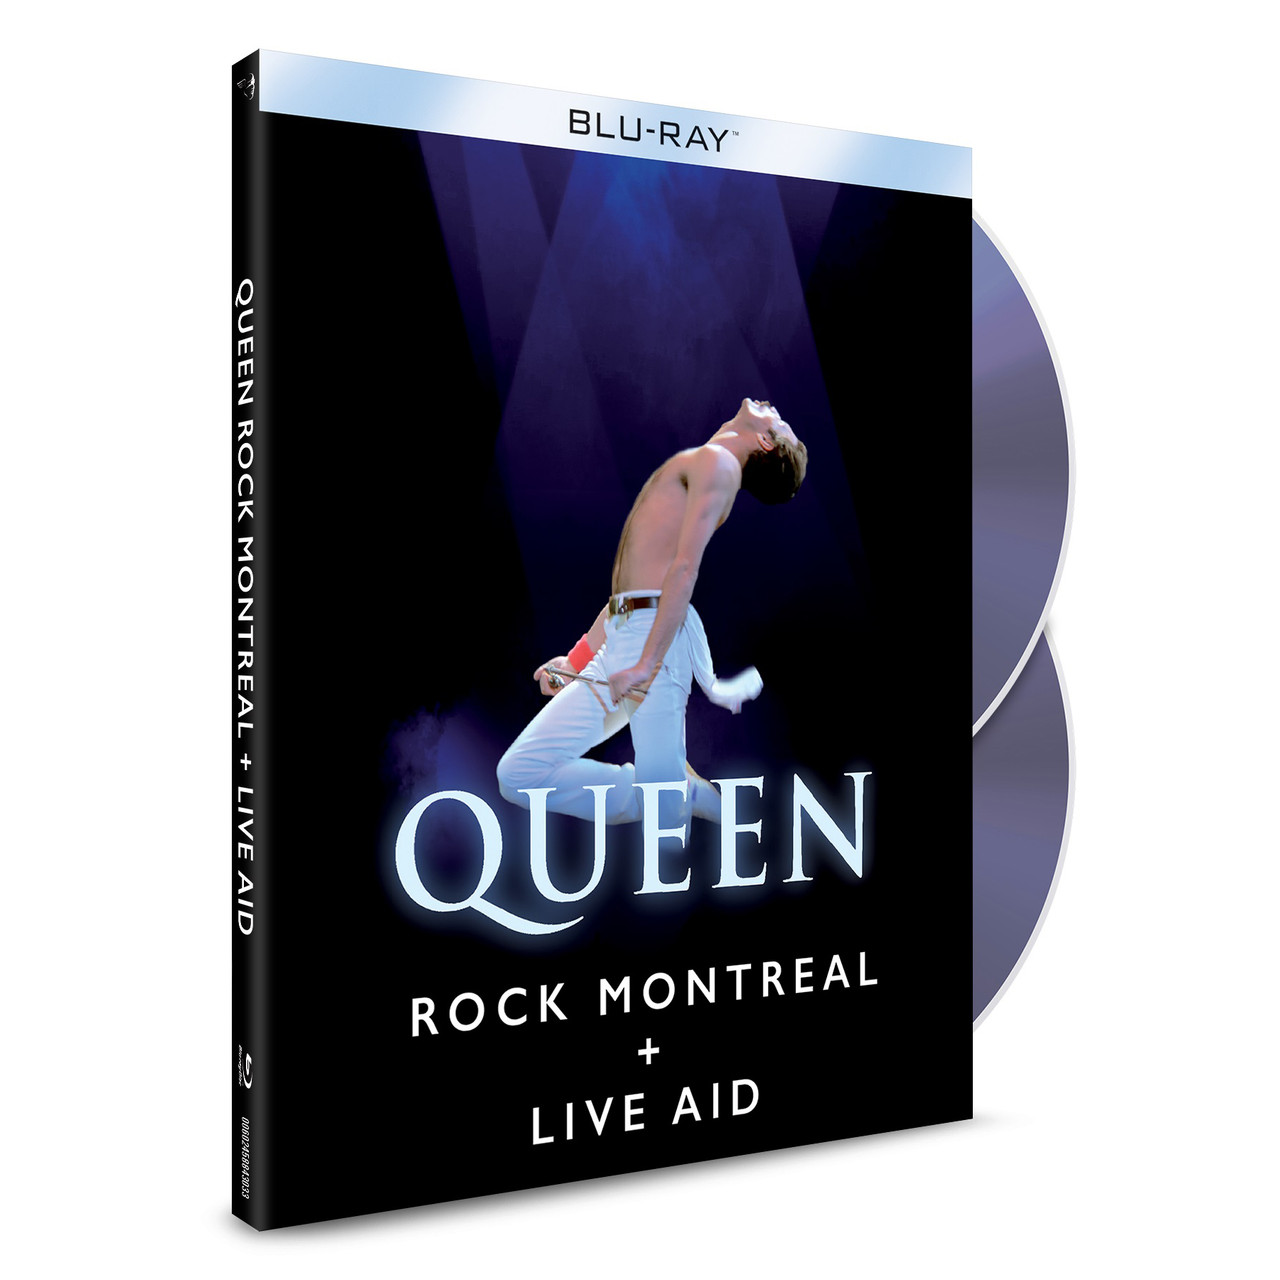 Queen - Rock Montreal + Live Aid (Blu-Ray)